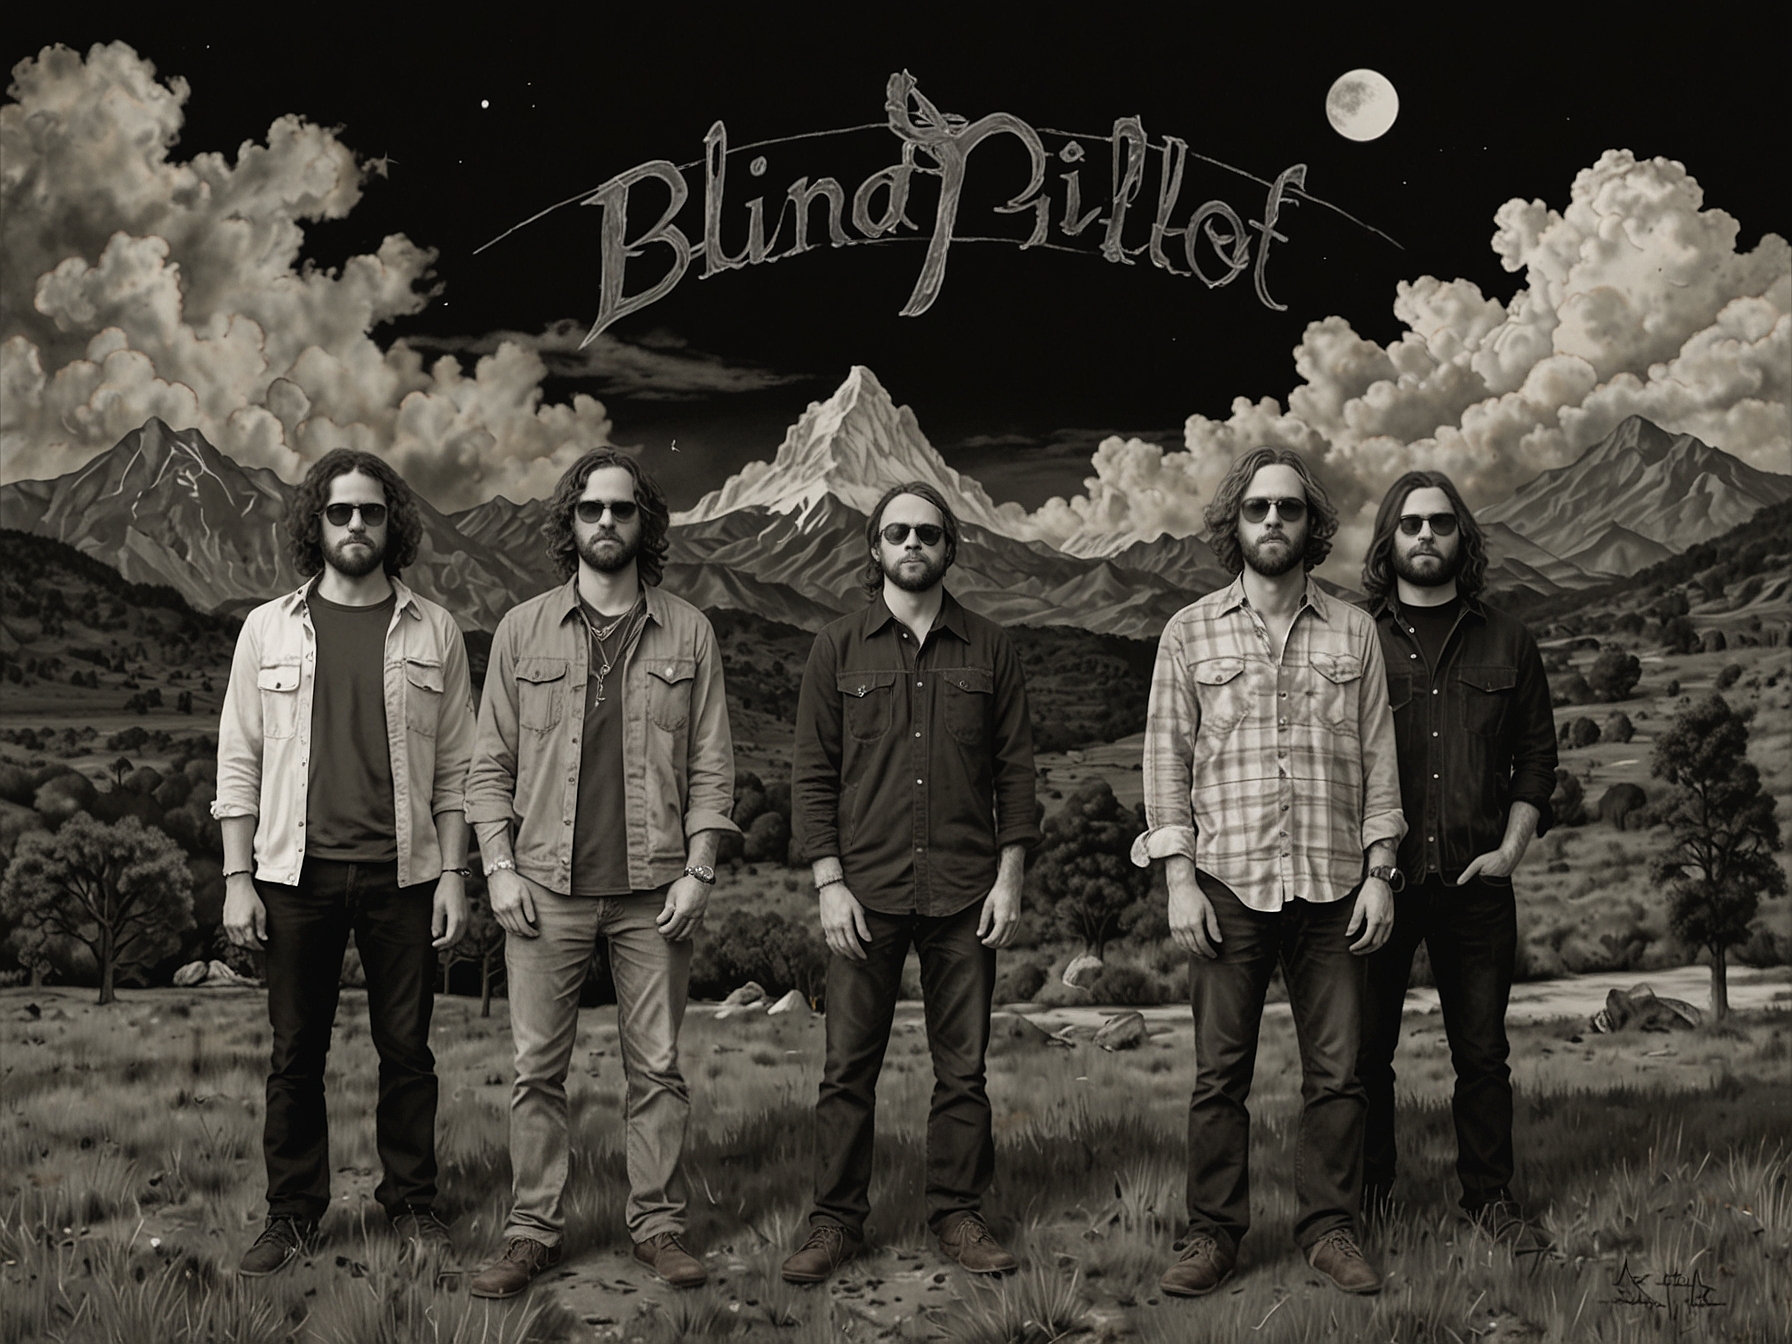 Album cover art of Blind Pilot’s new release, reflecting the band’s evolution and fresh influences while retaining their signature indie-folk sound and heartfelt storytelling.